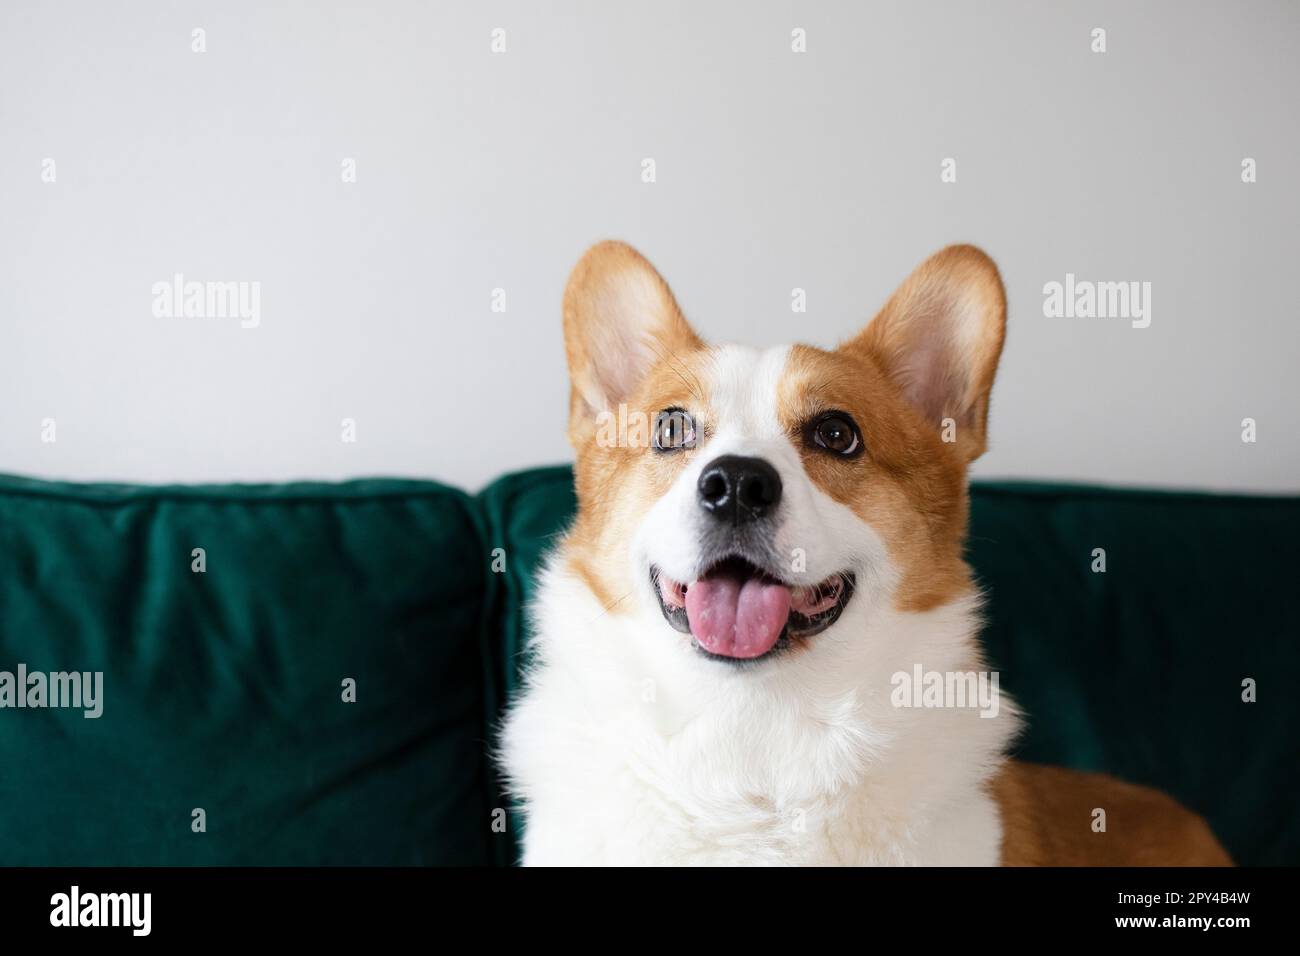 Portrait of a gorgeous purebred Welsh Pembroke Corgi dog on the green couch Stock Photo